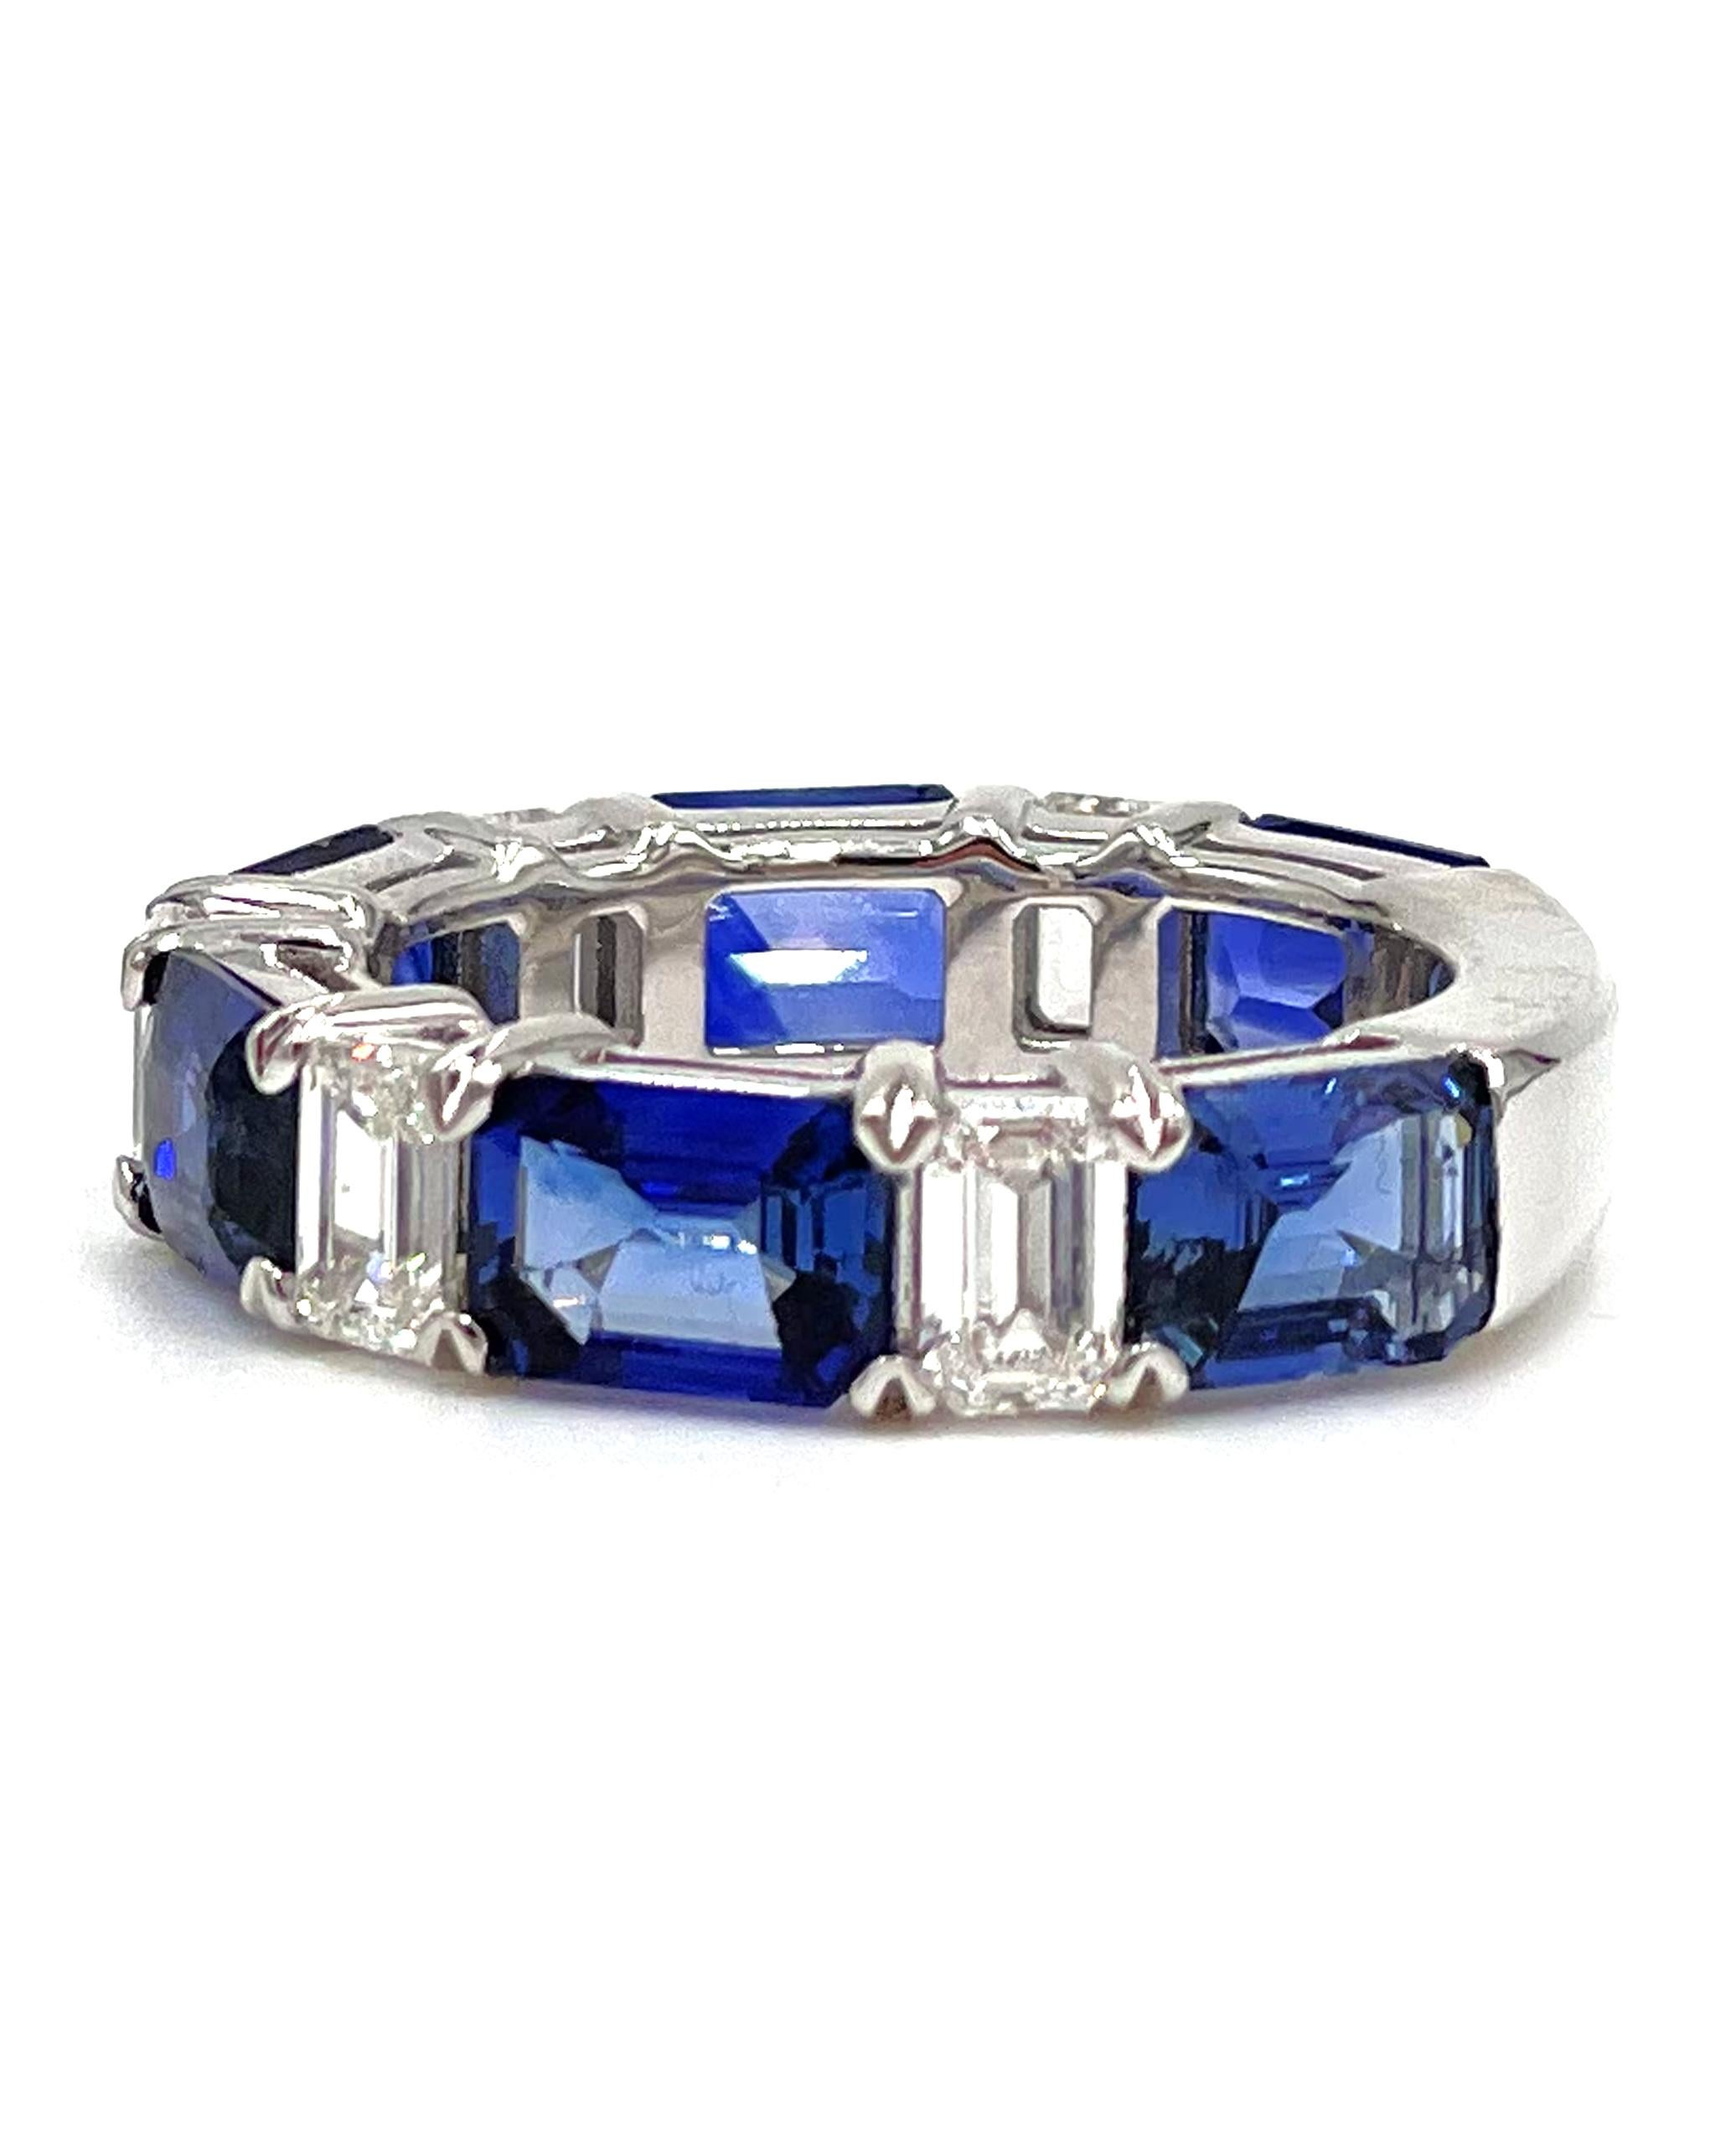 18k white gold ring with 5 emerald cut diamonds totaling 1.38 carats and 6 emerald cut sapphires, set East-West, totaling 6.10 carats.

* Finger size 7 (can be sized)
* Diamonds are E/F color, VVS clarity
* Approximately 4.84mm wide and 3.0-3.65mm